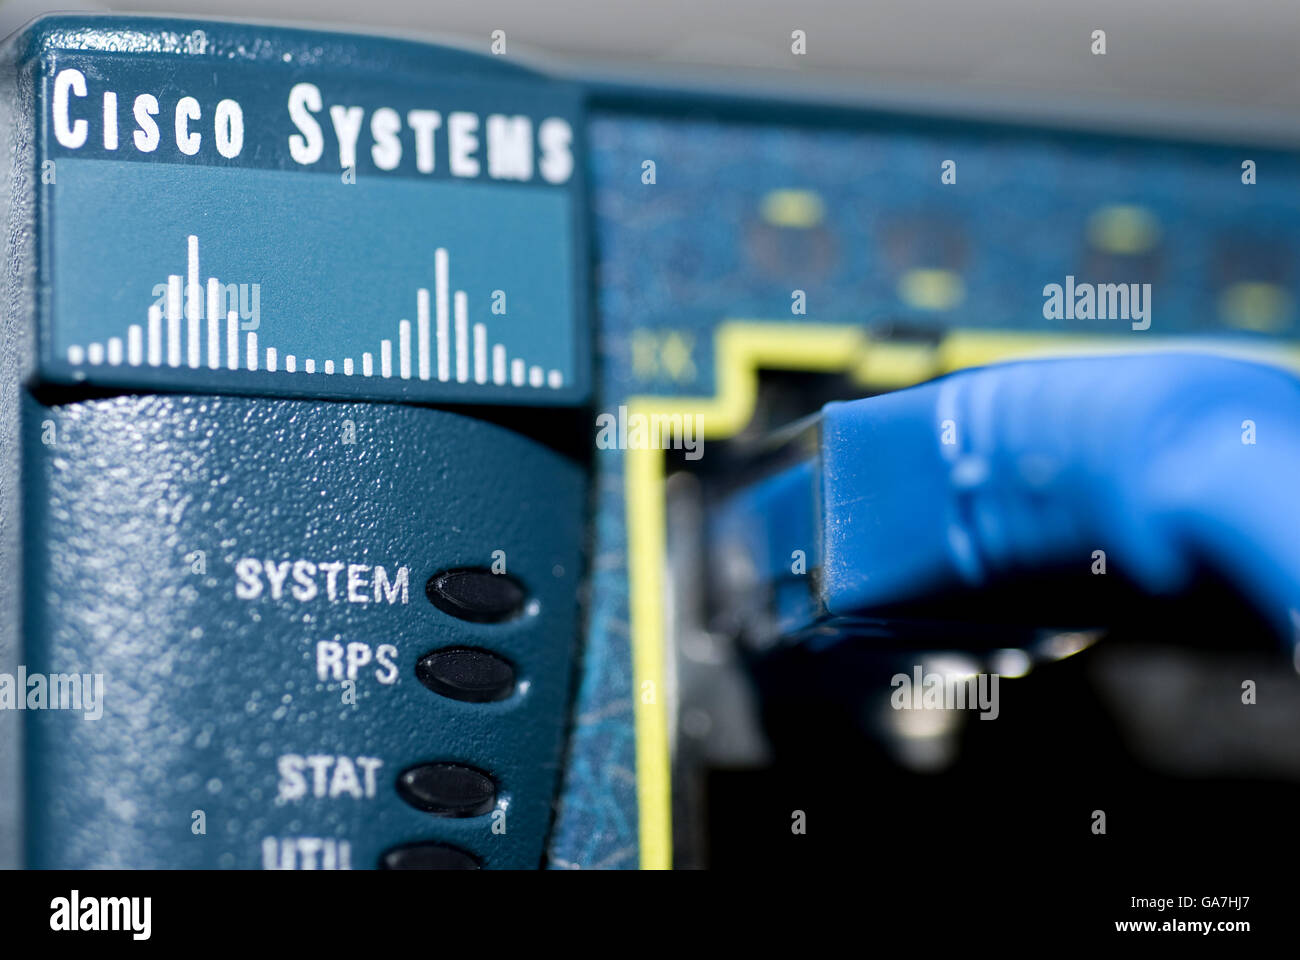 Technology Stock. Cisco Systems ethernet switch Stock Photo